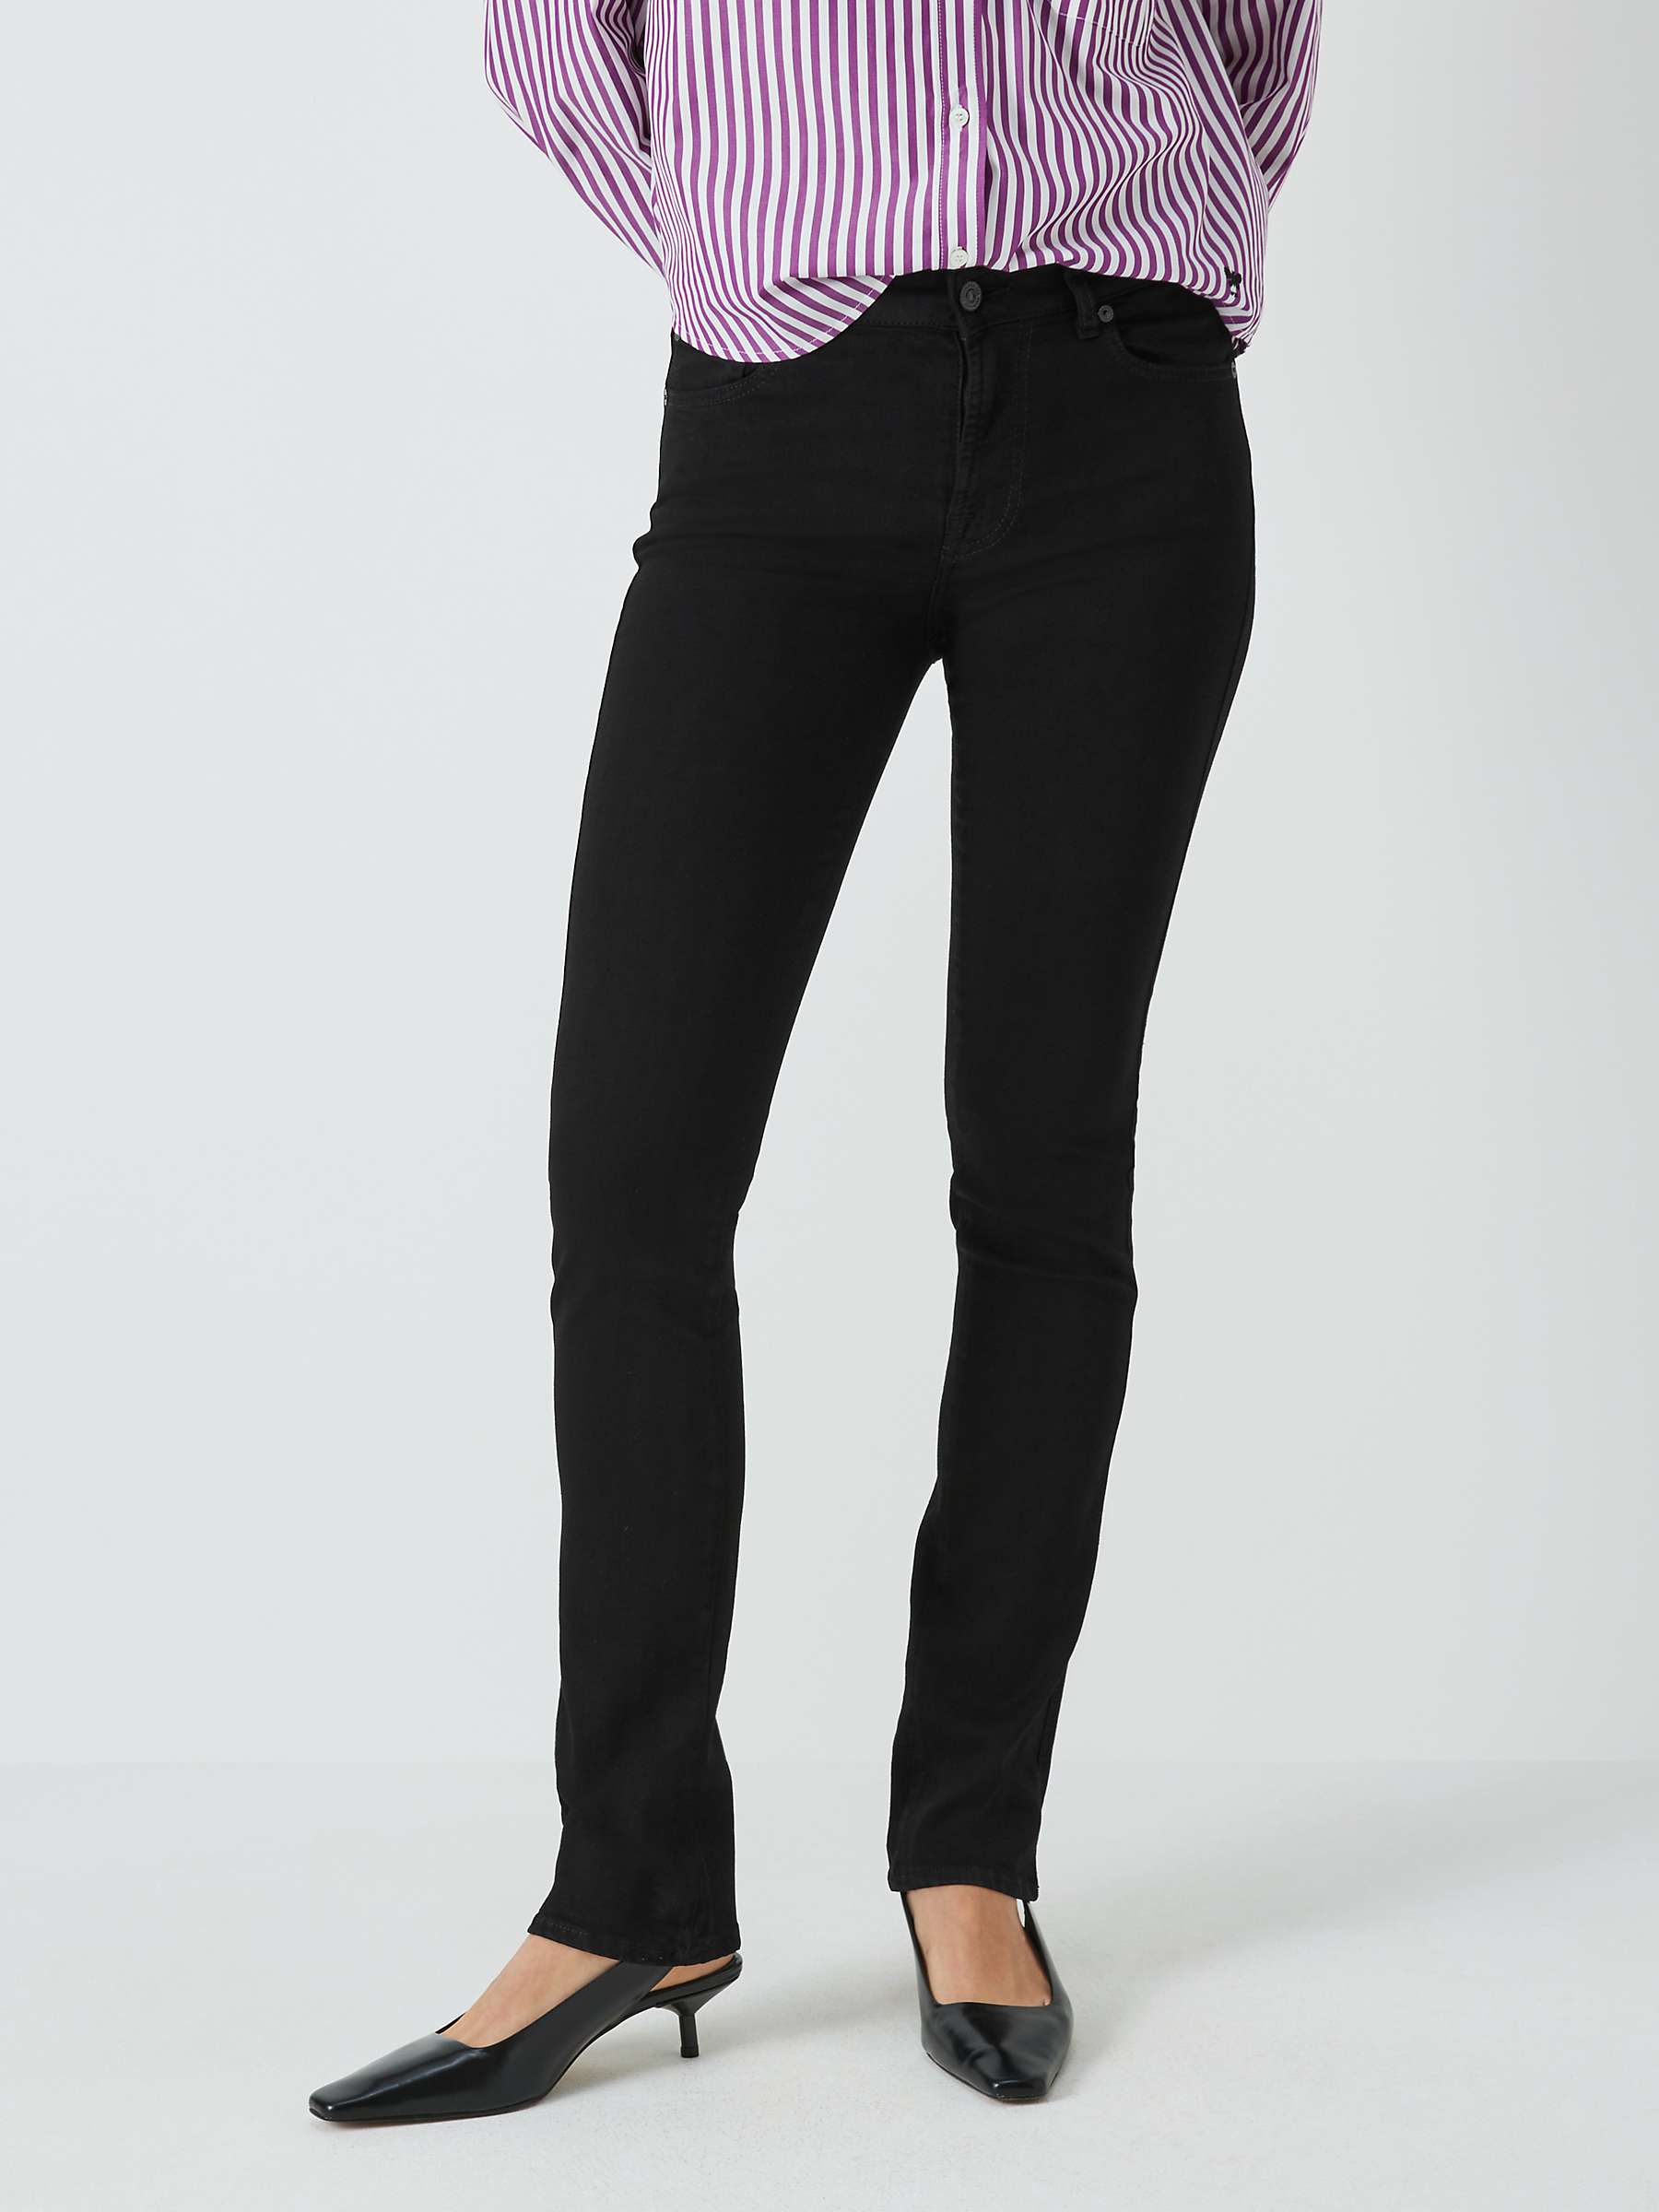 Buy 7 For All Mankind Kimmie B(Air) Jeans, Rinsed Black Online at johnlewis.com